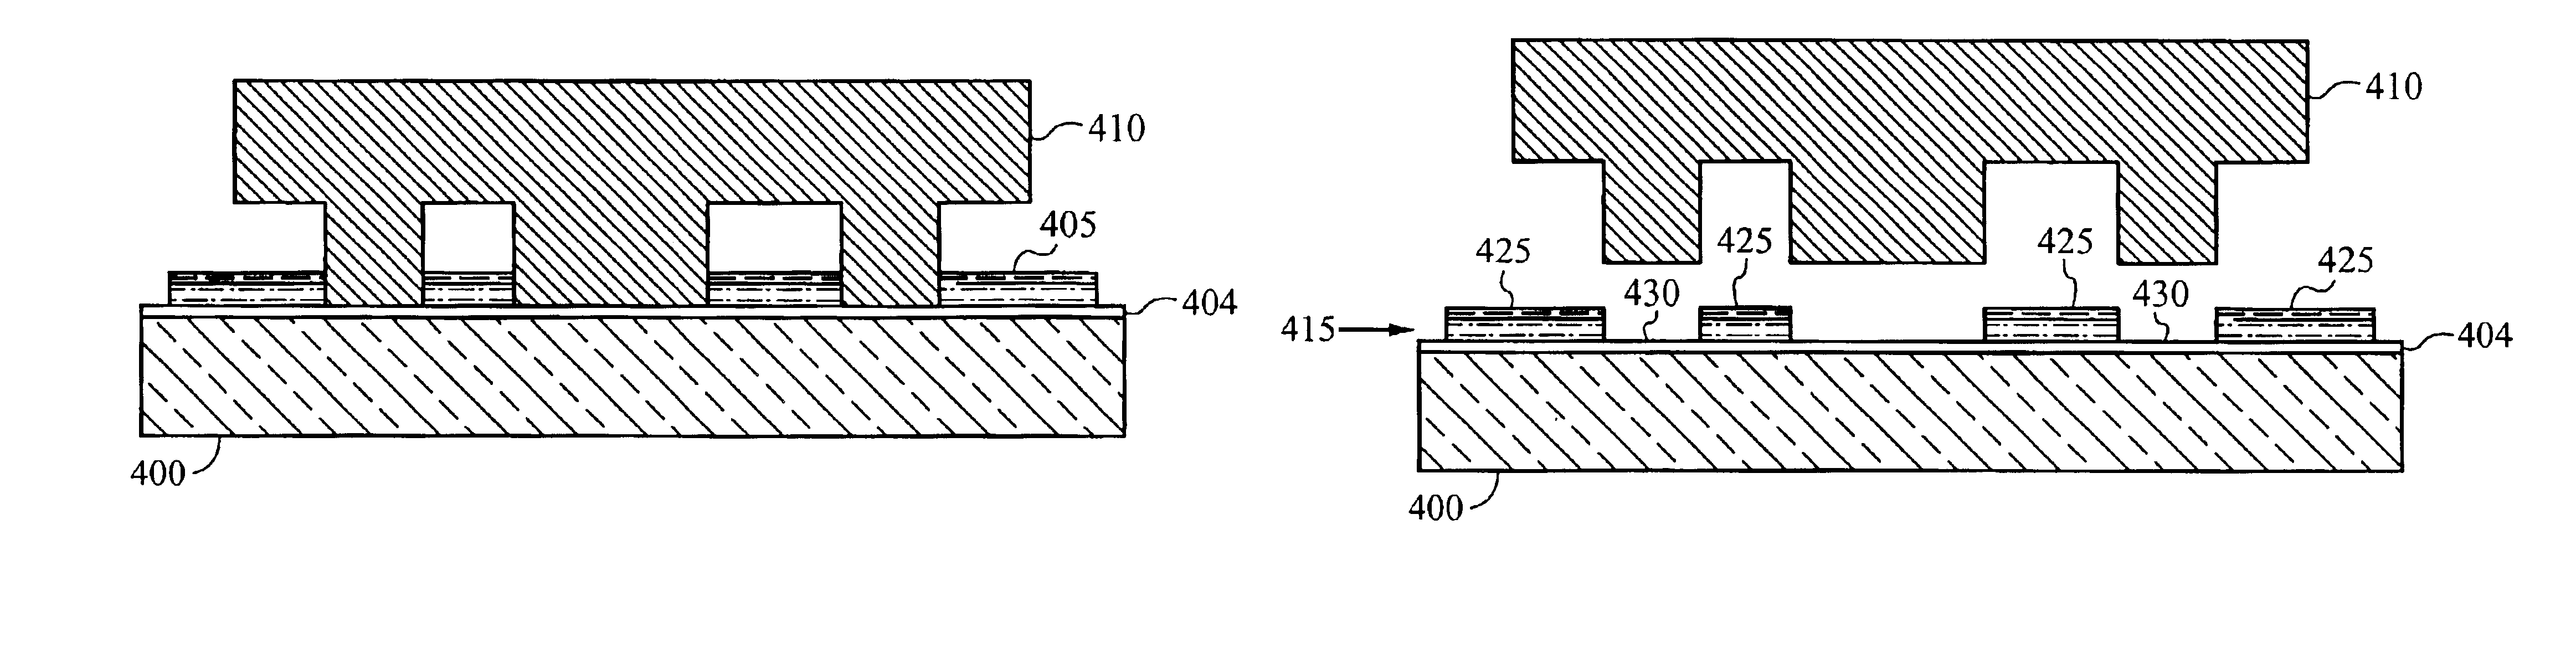 Interface layer for the fabrication of electronic devices